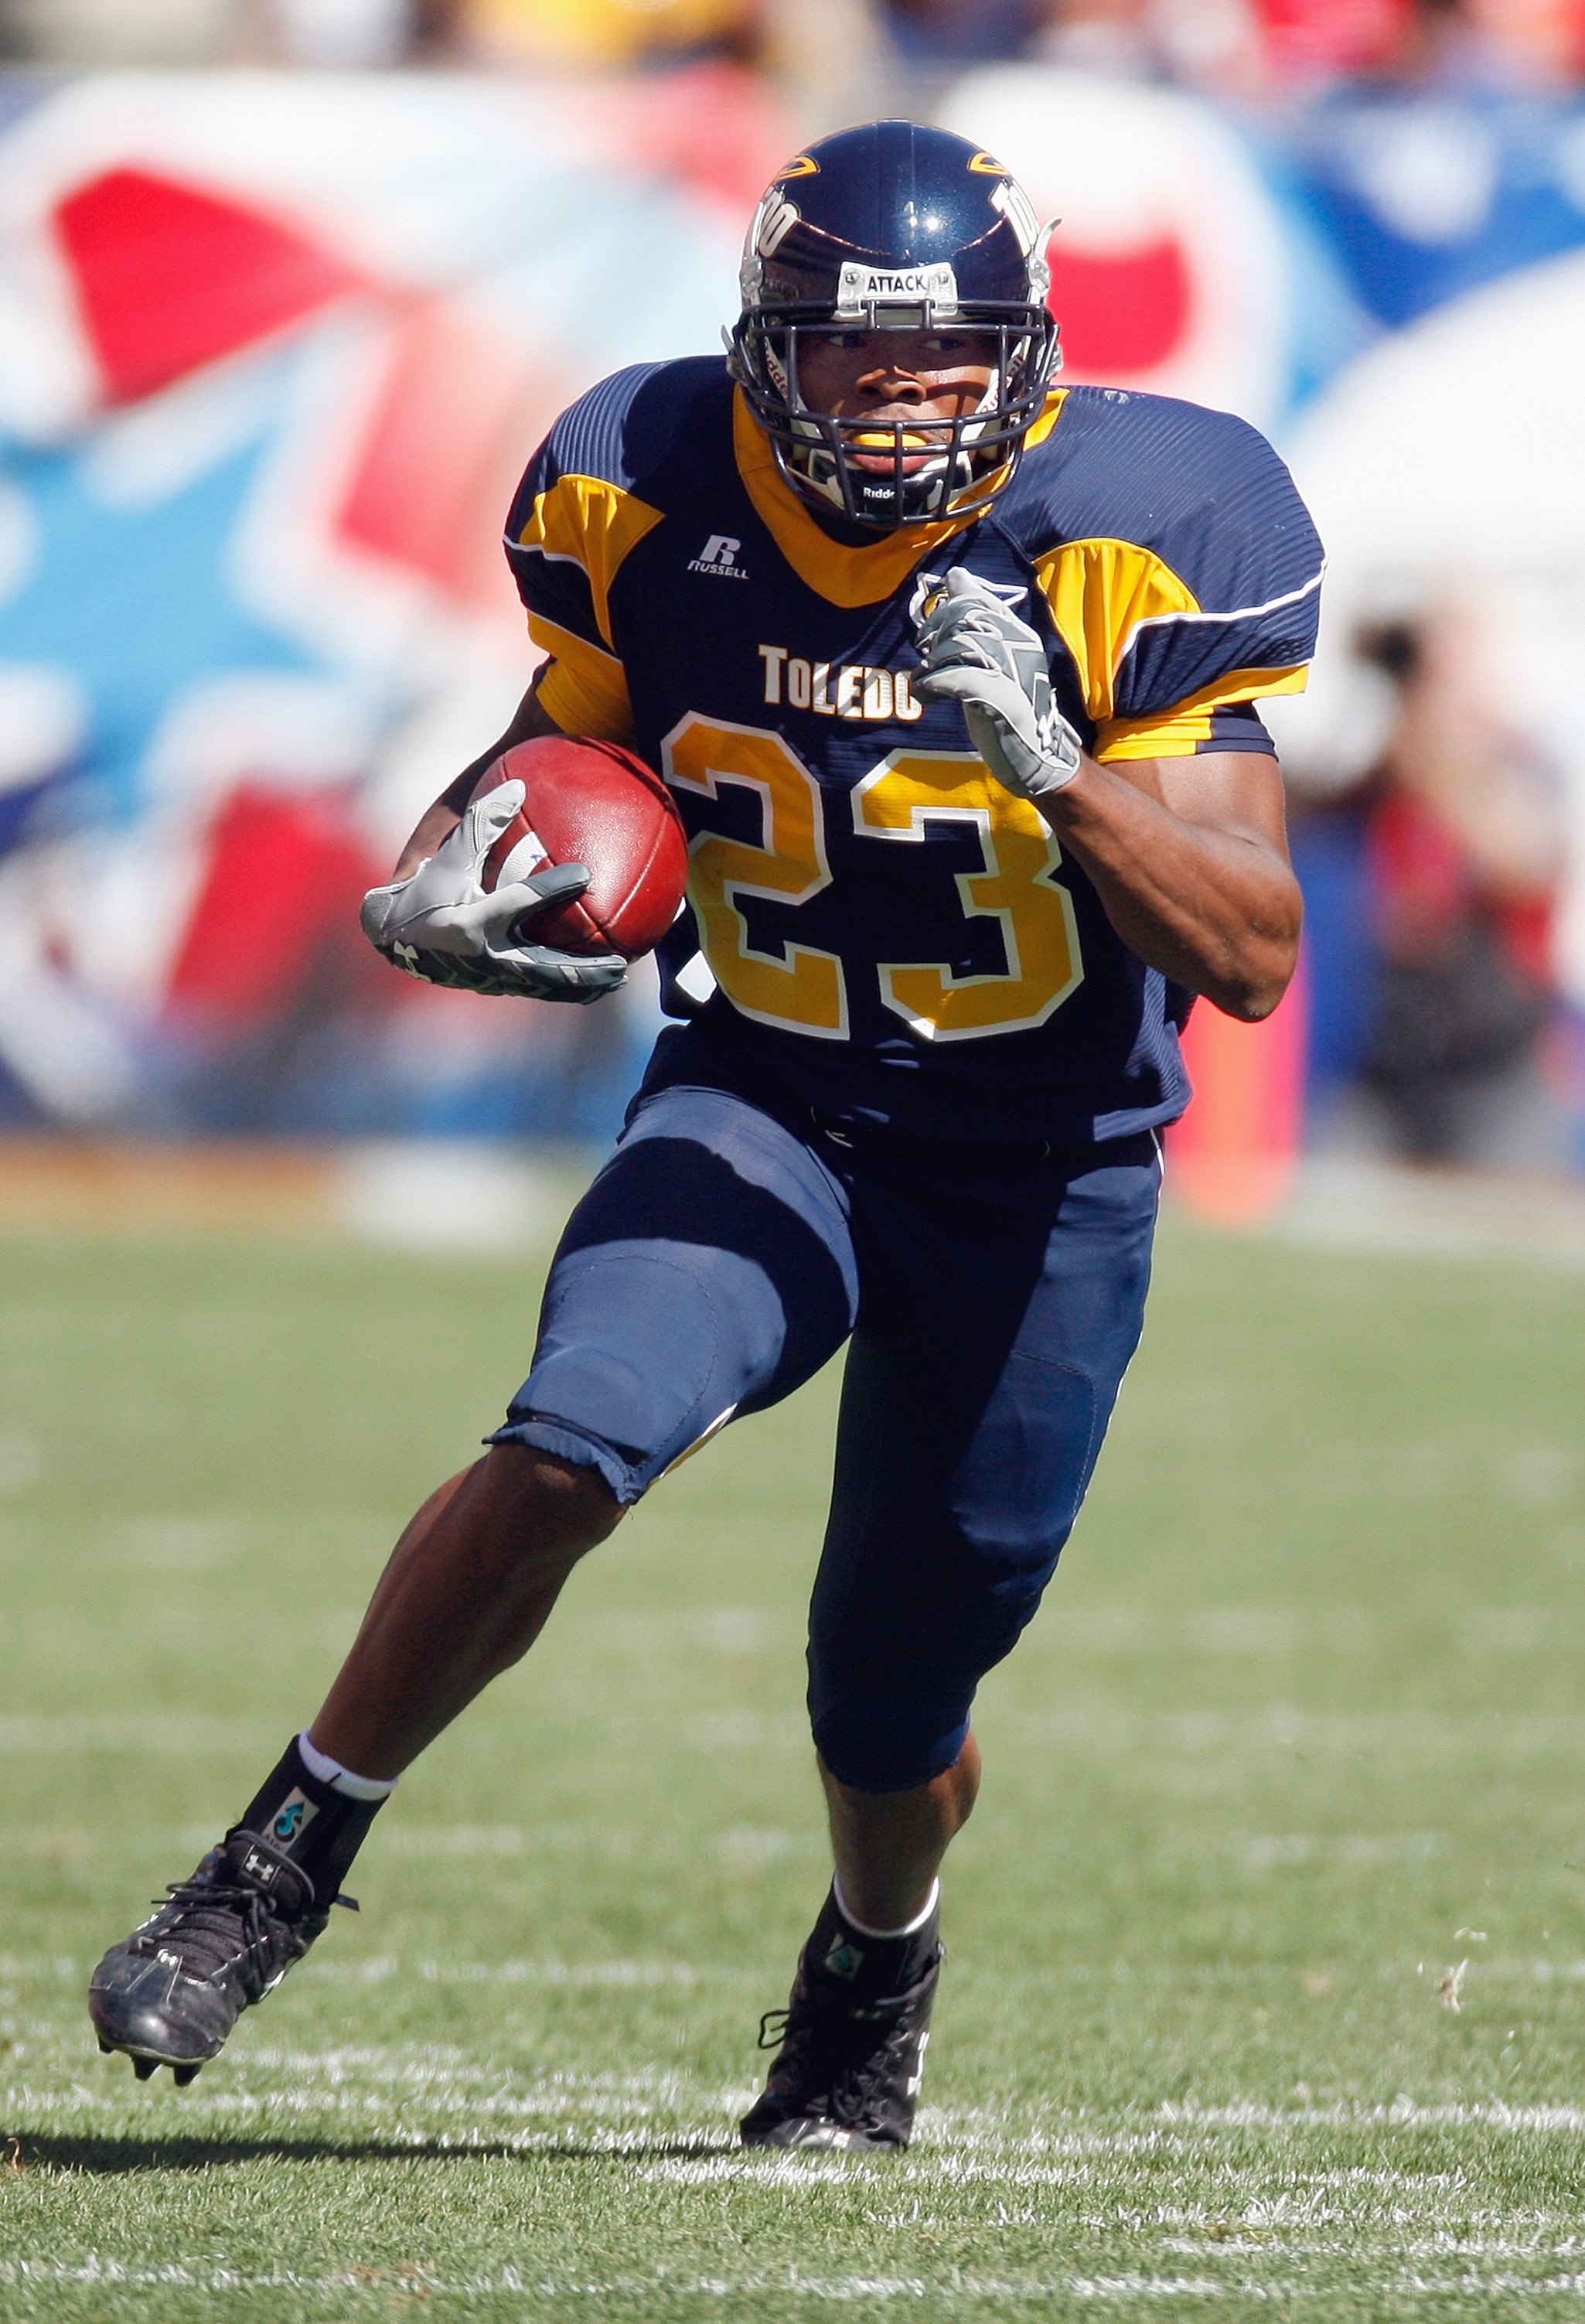 CLEVELAND - SEPTEMBER 19: Morgan Williams #23 of the Toledo Rockets carries the ball during the game against the Ohio State Buckeyes  at Cleveland Browns Stadium on September 19, 2009 in Cleveland, Ohio. The Ohio State Buckeyes shutout the Toledo Rockets